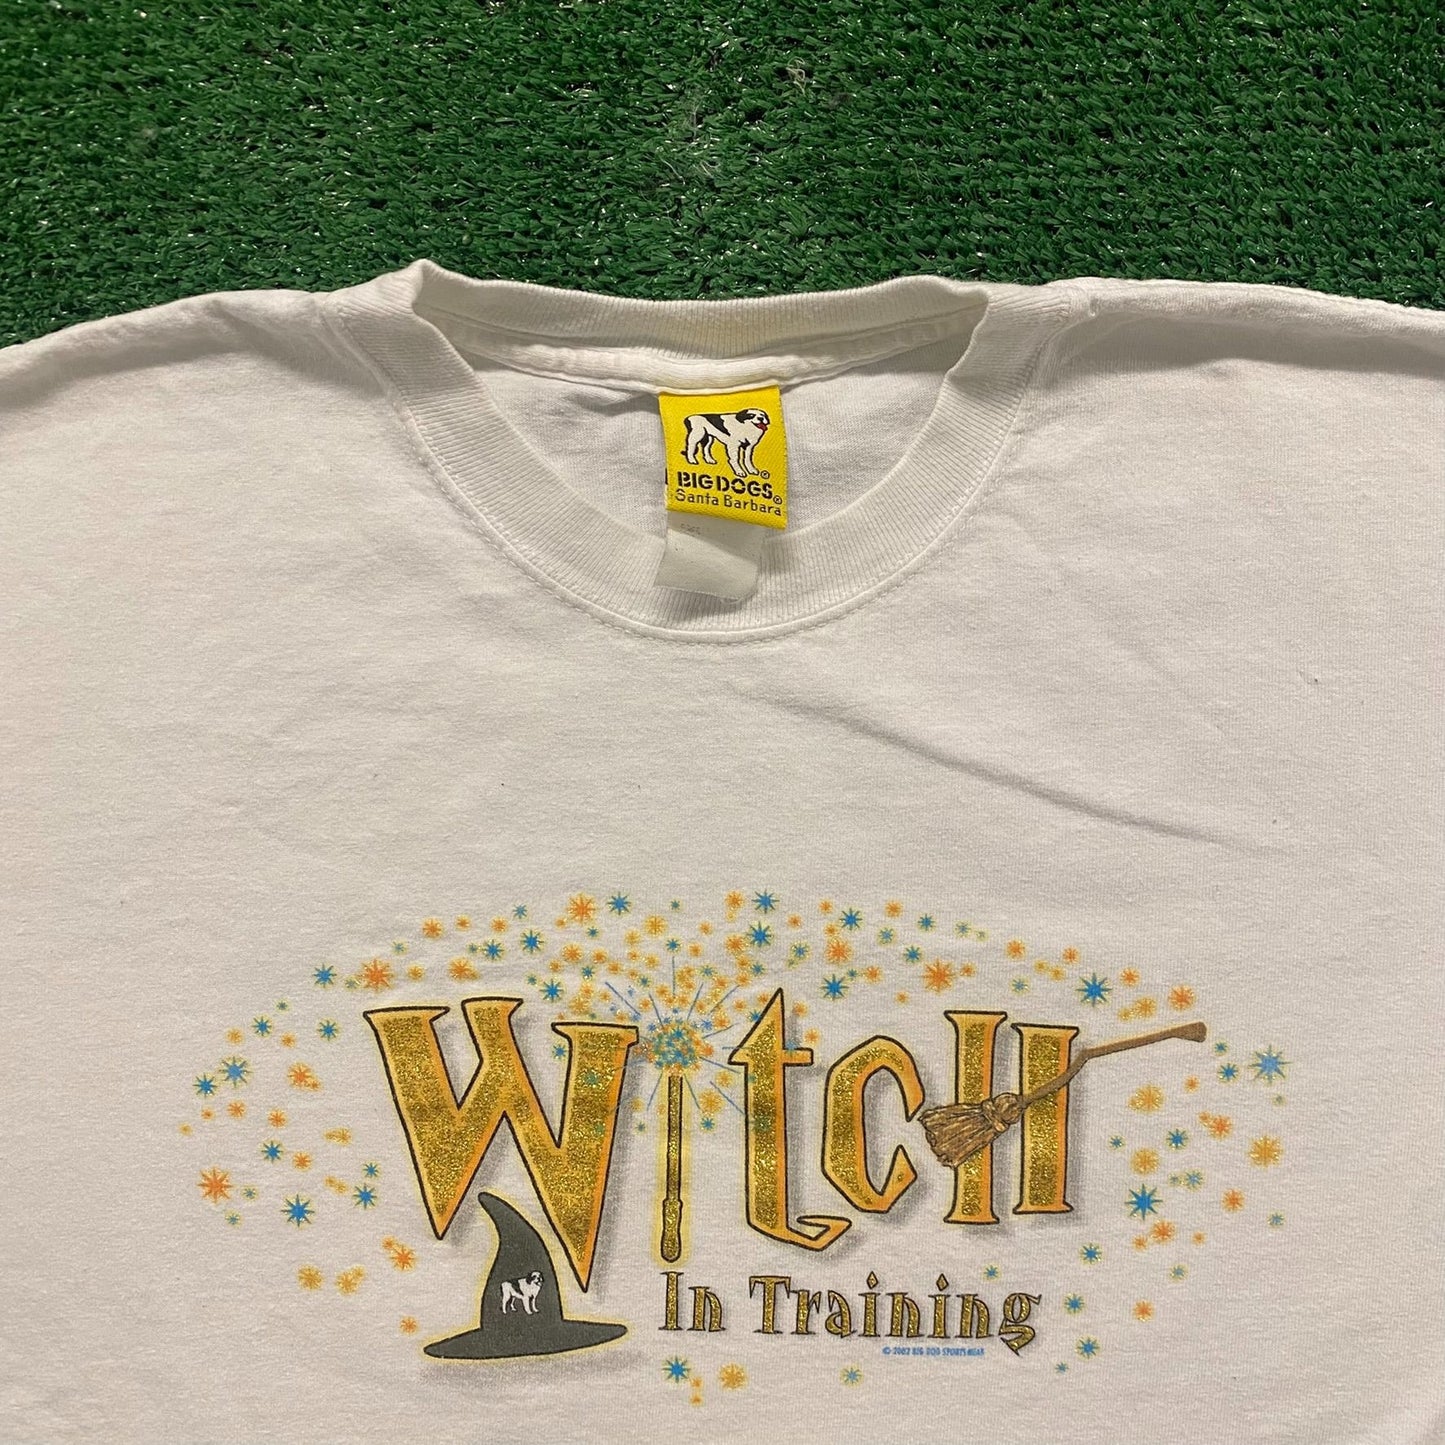 Big Dogs Witch in Training Vintage Magic T-Shirt